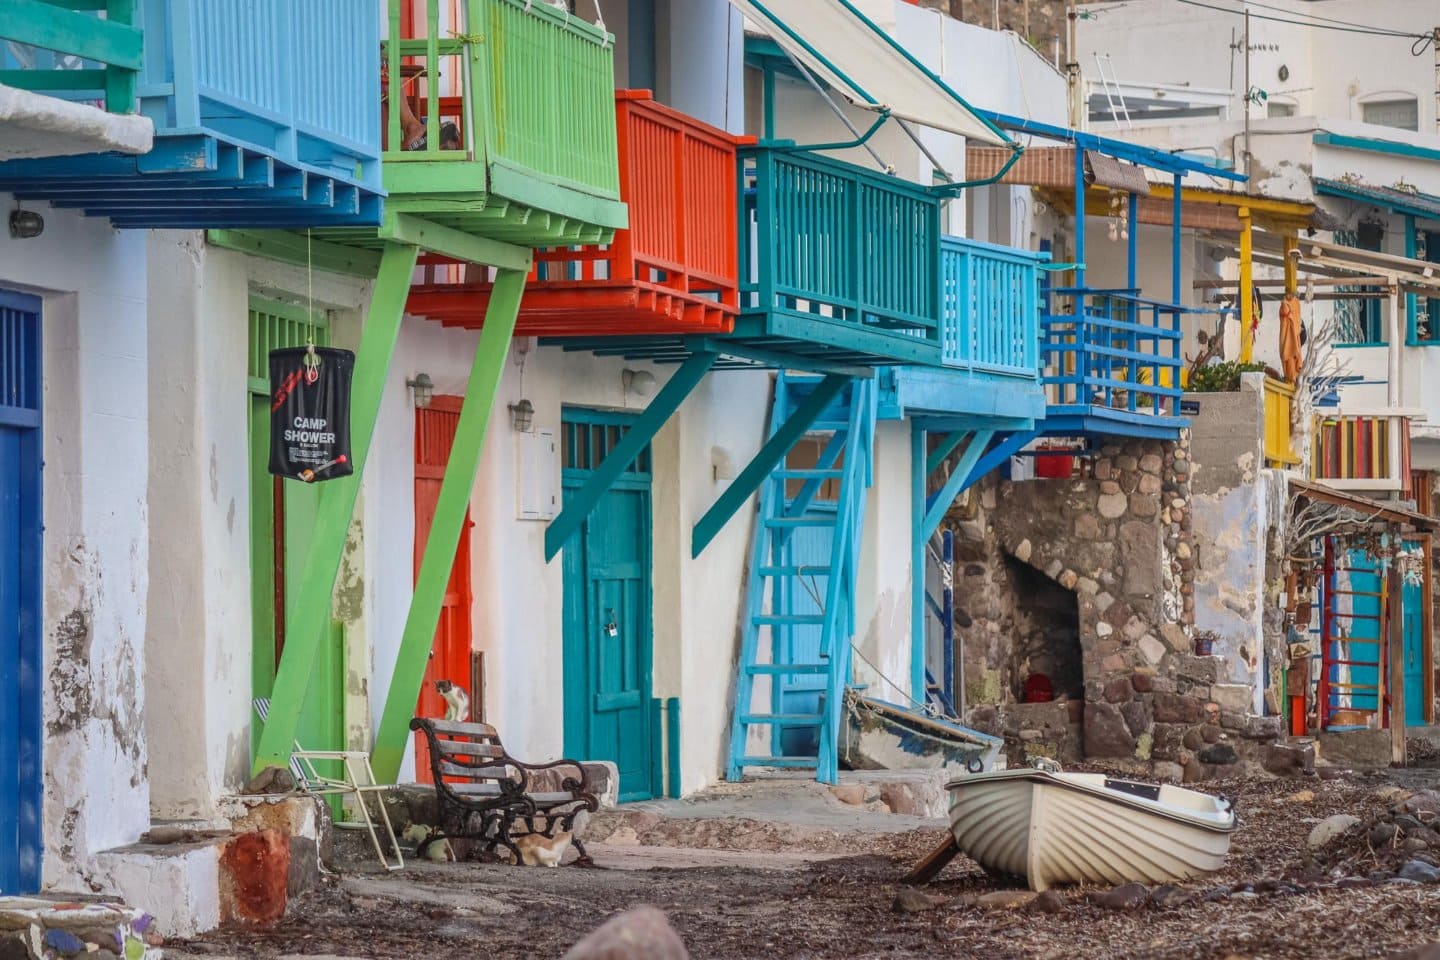 colourful houses in Klima